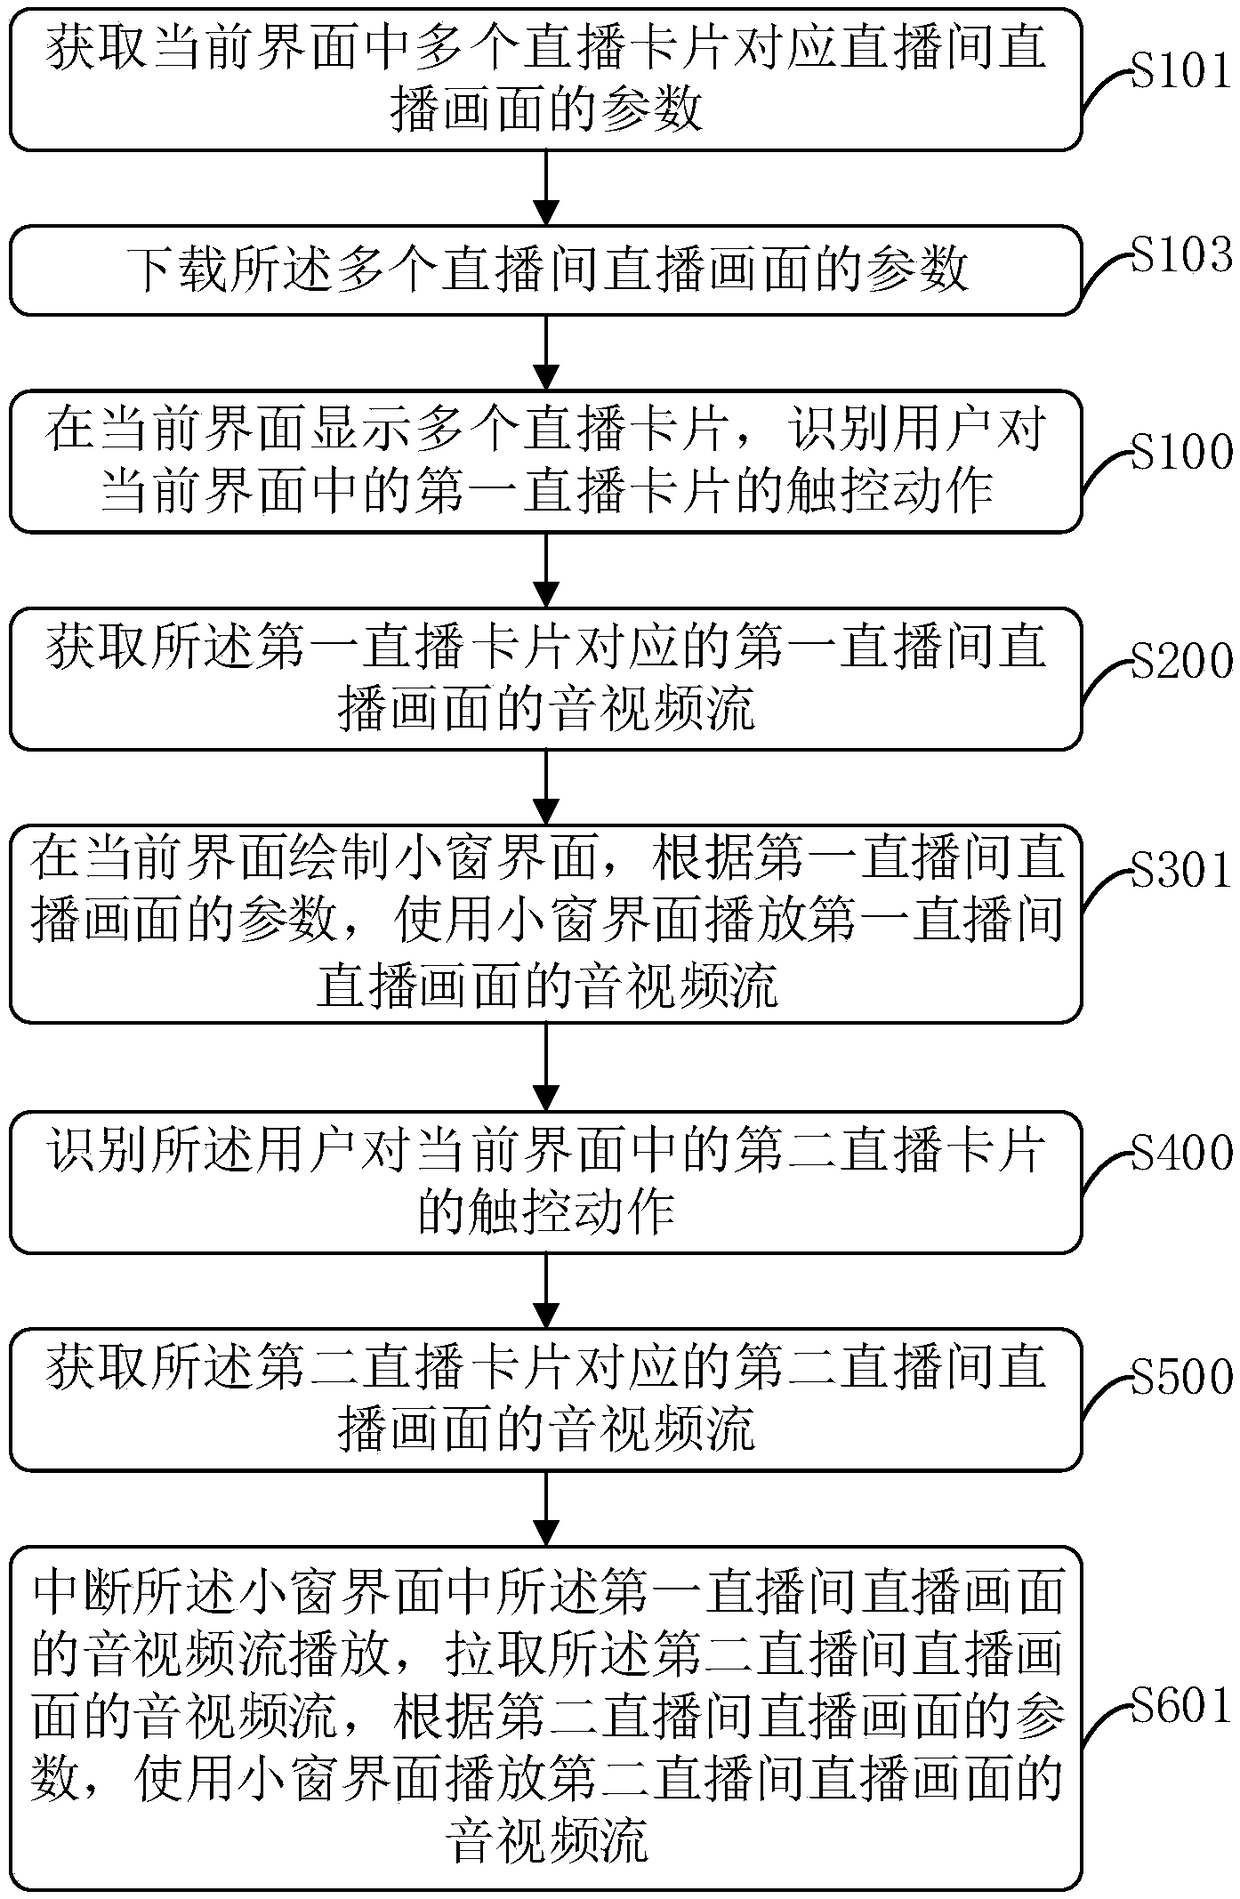 Live broadcast picture content switching display method, storage equipment and computer equipment